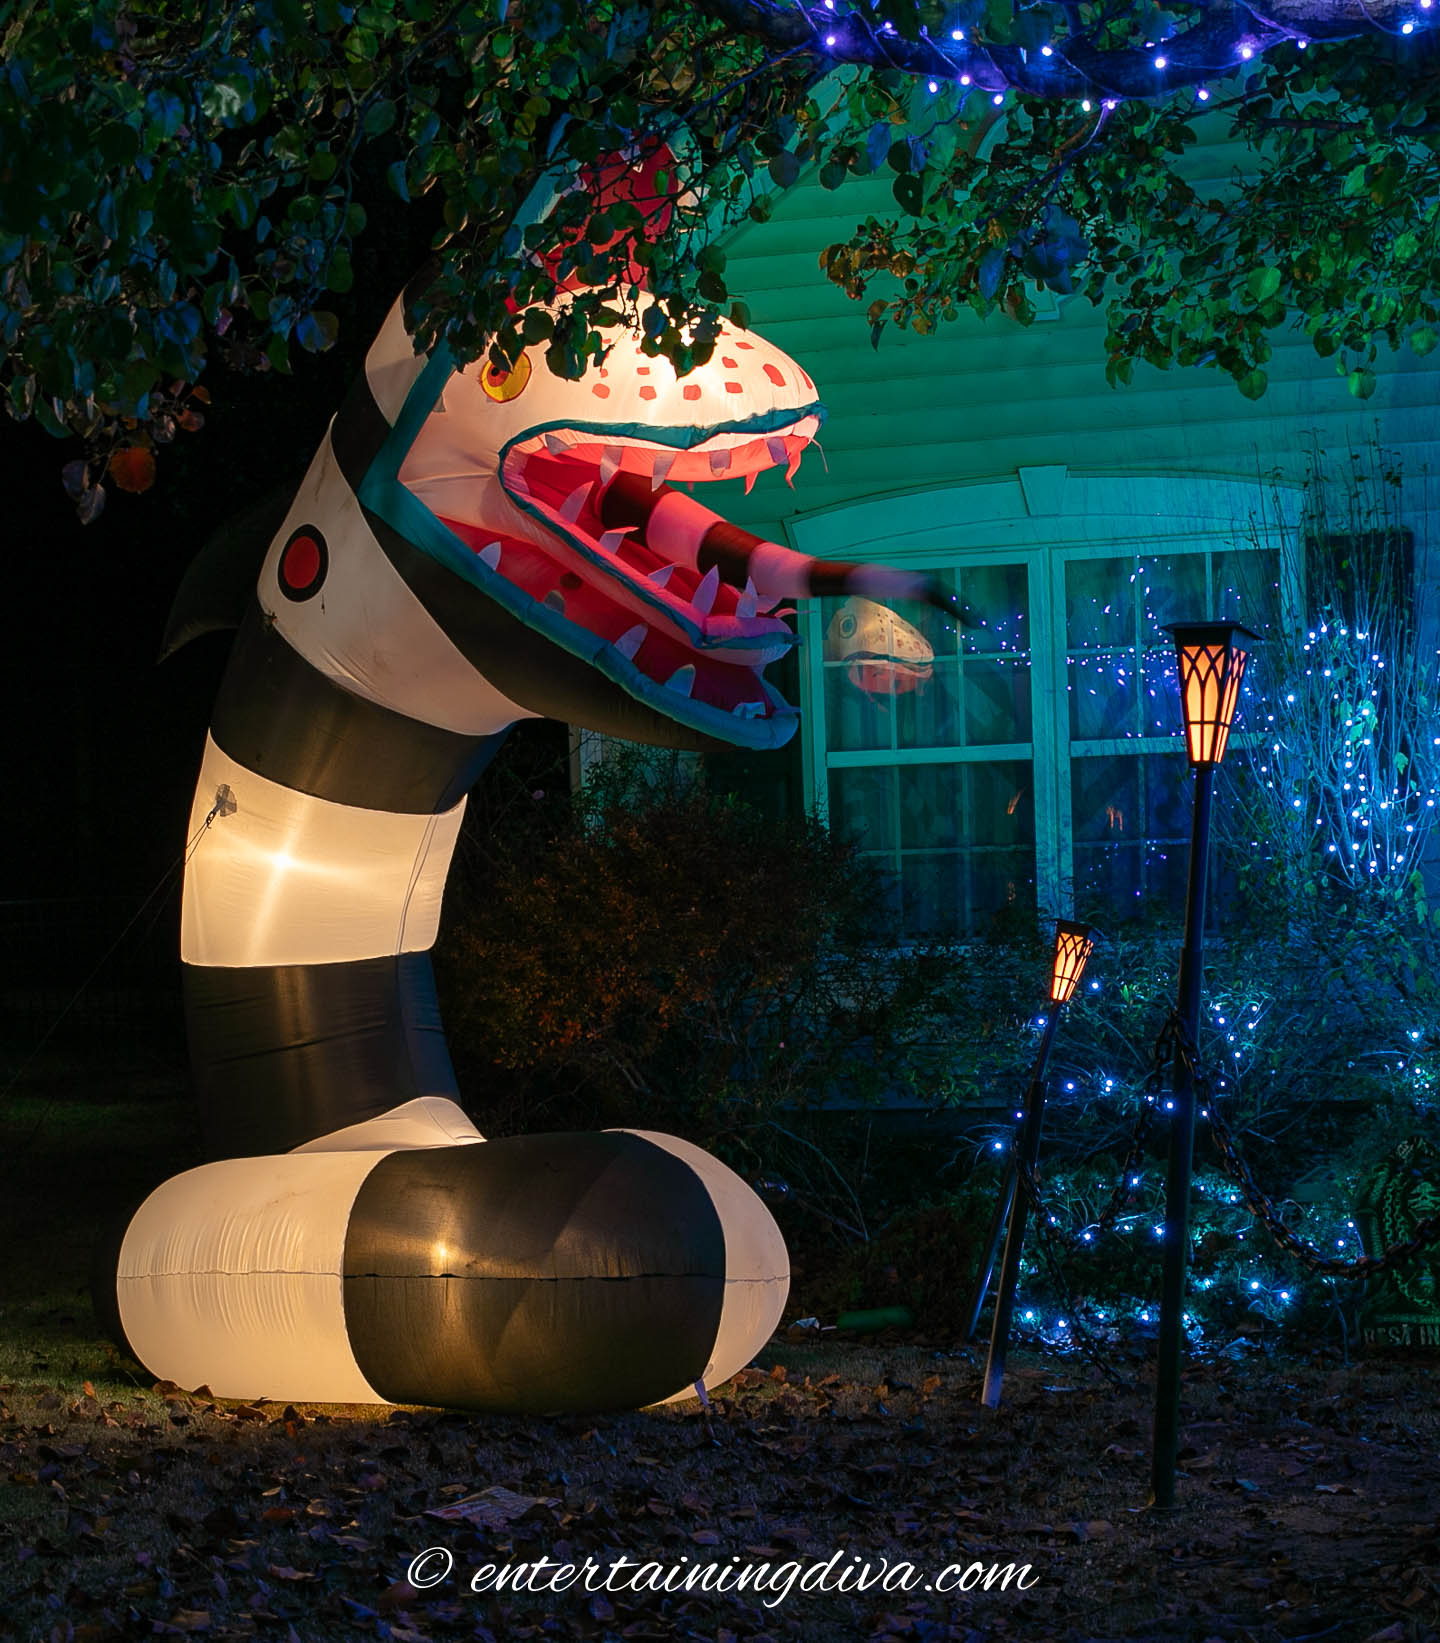 A lighted black and white striped inflatable sandworm perfect for Halloween outdoor decorating.